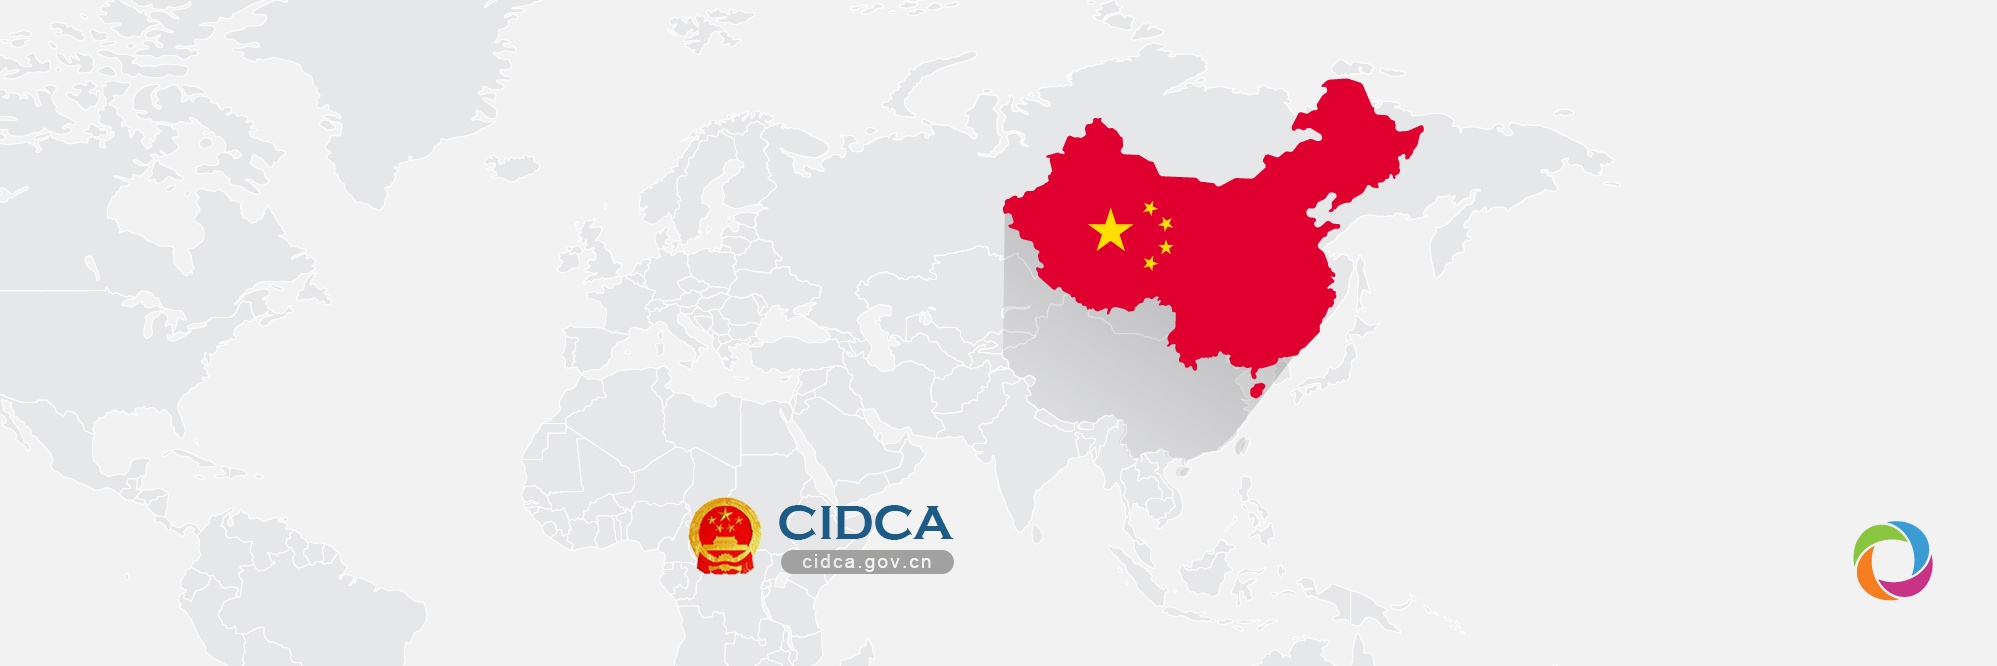 Introducing China’s new development agency CIDCA – big expectations to change the country’s foreign aid sector and make a difference to the world